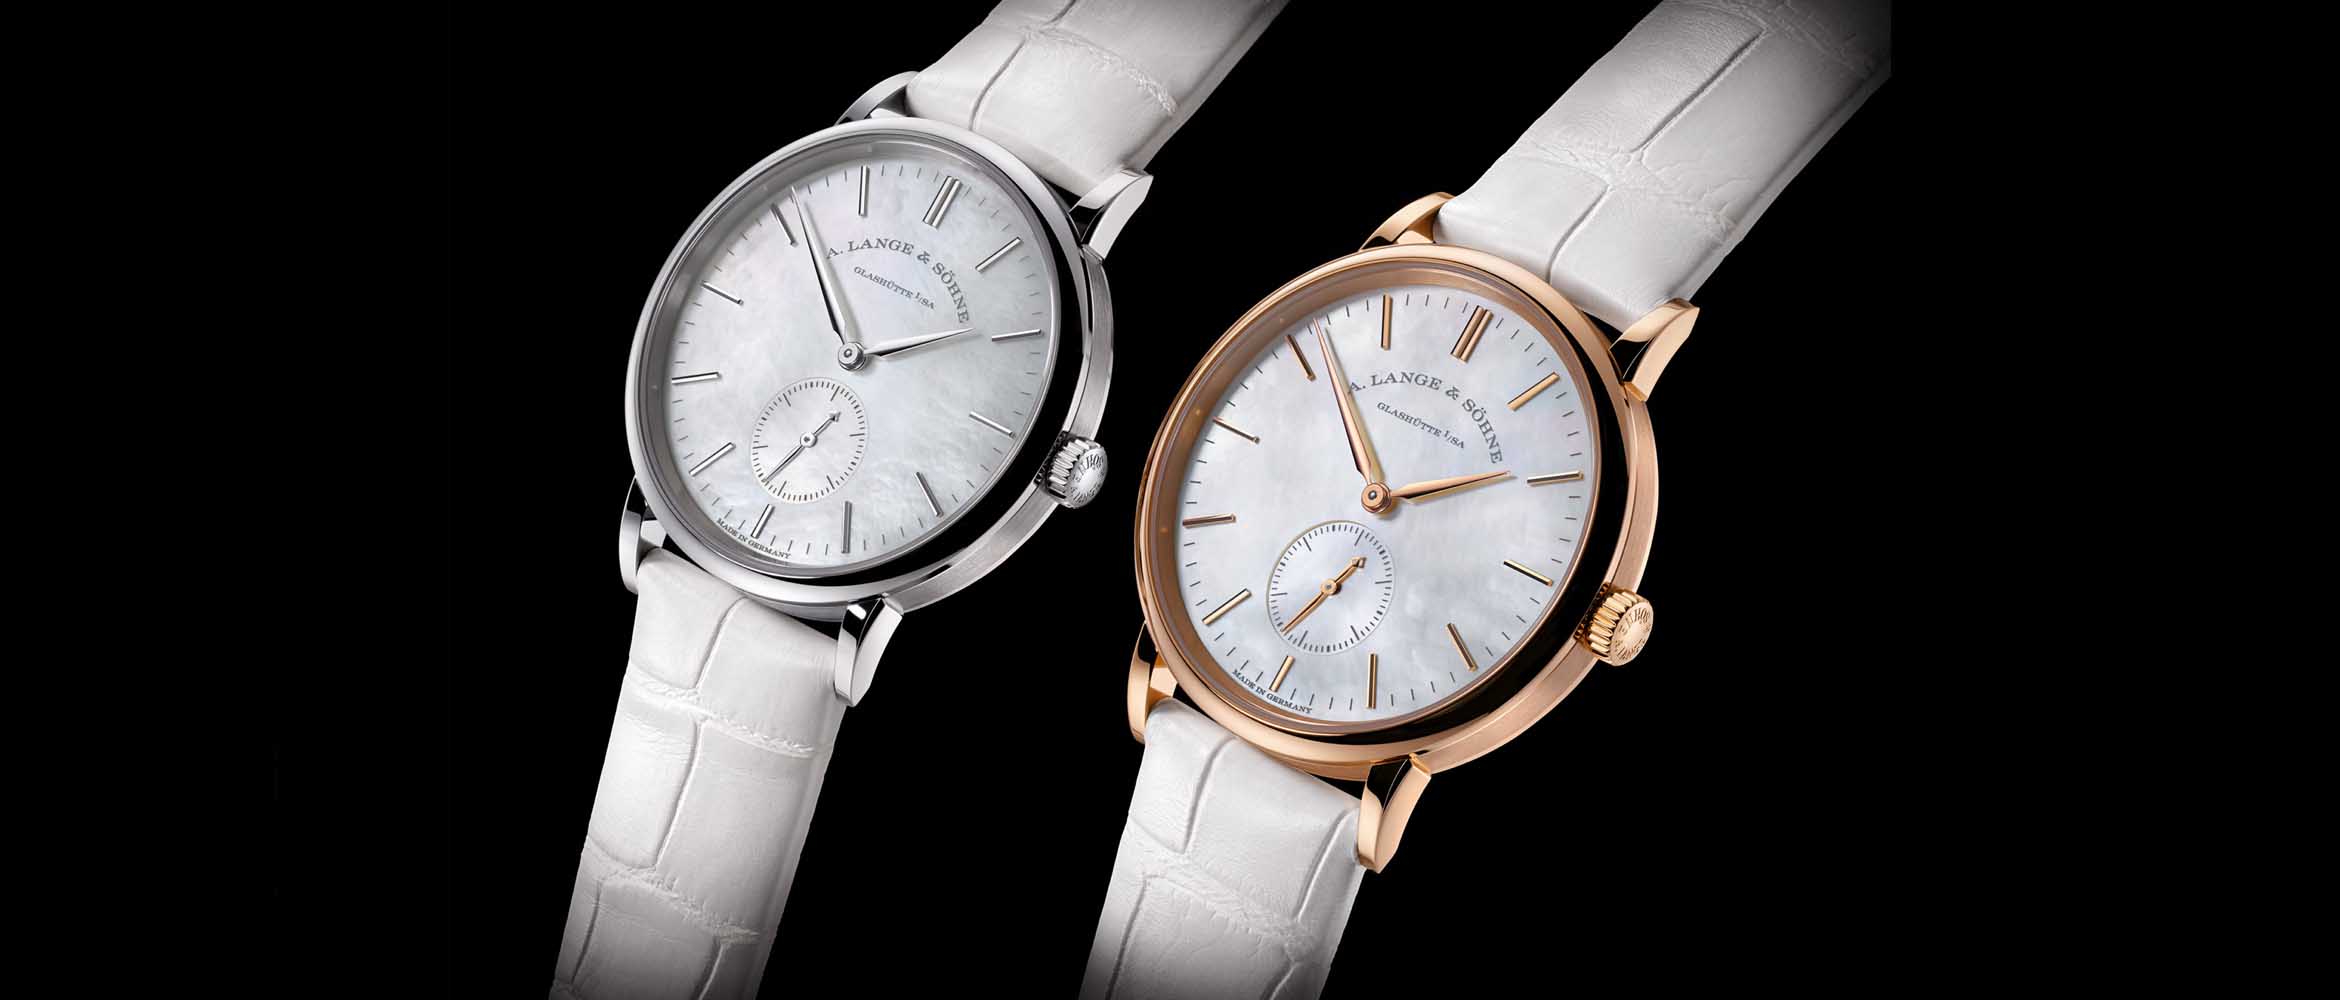 Watchmakers A. Lange & Söhne presented additional models for its Saxonia line